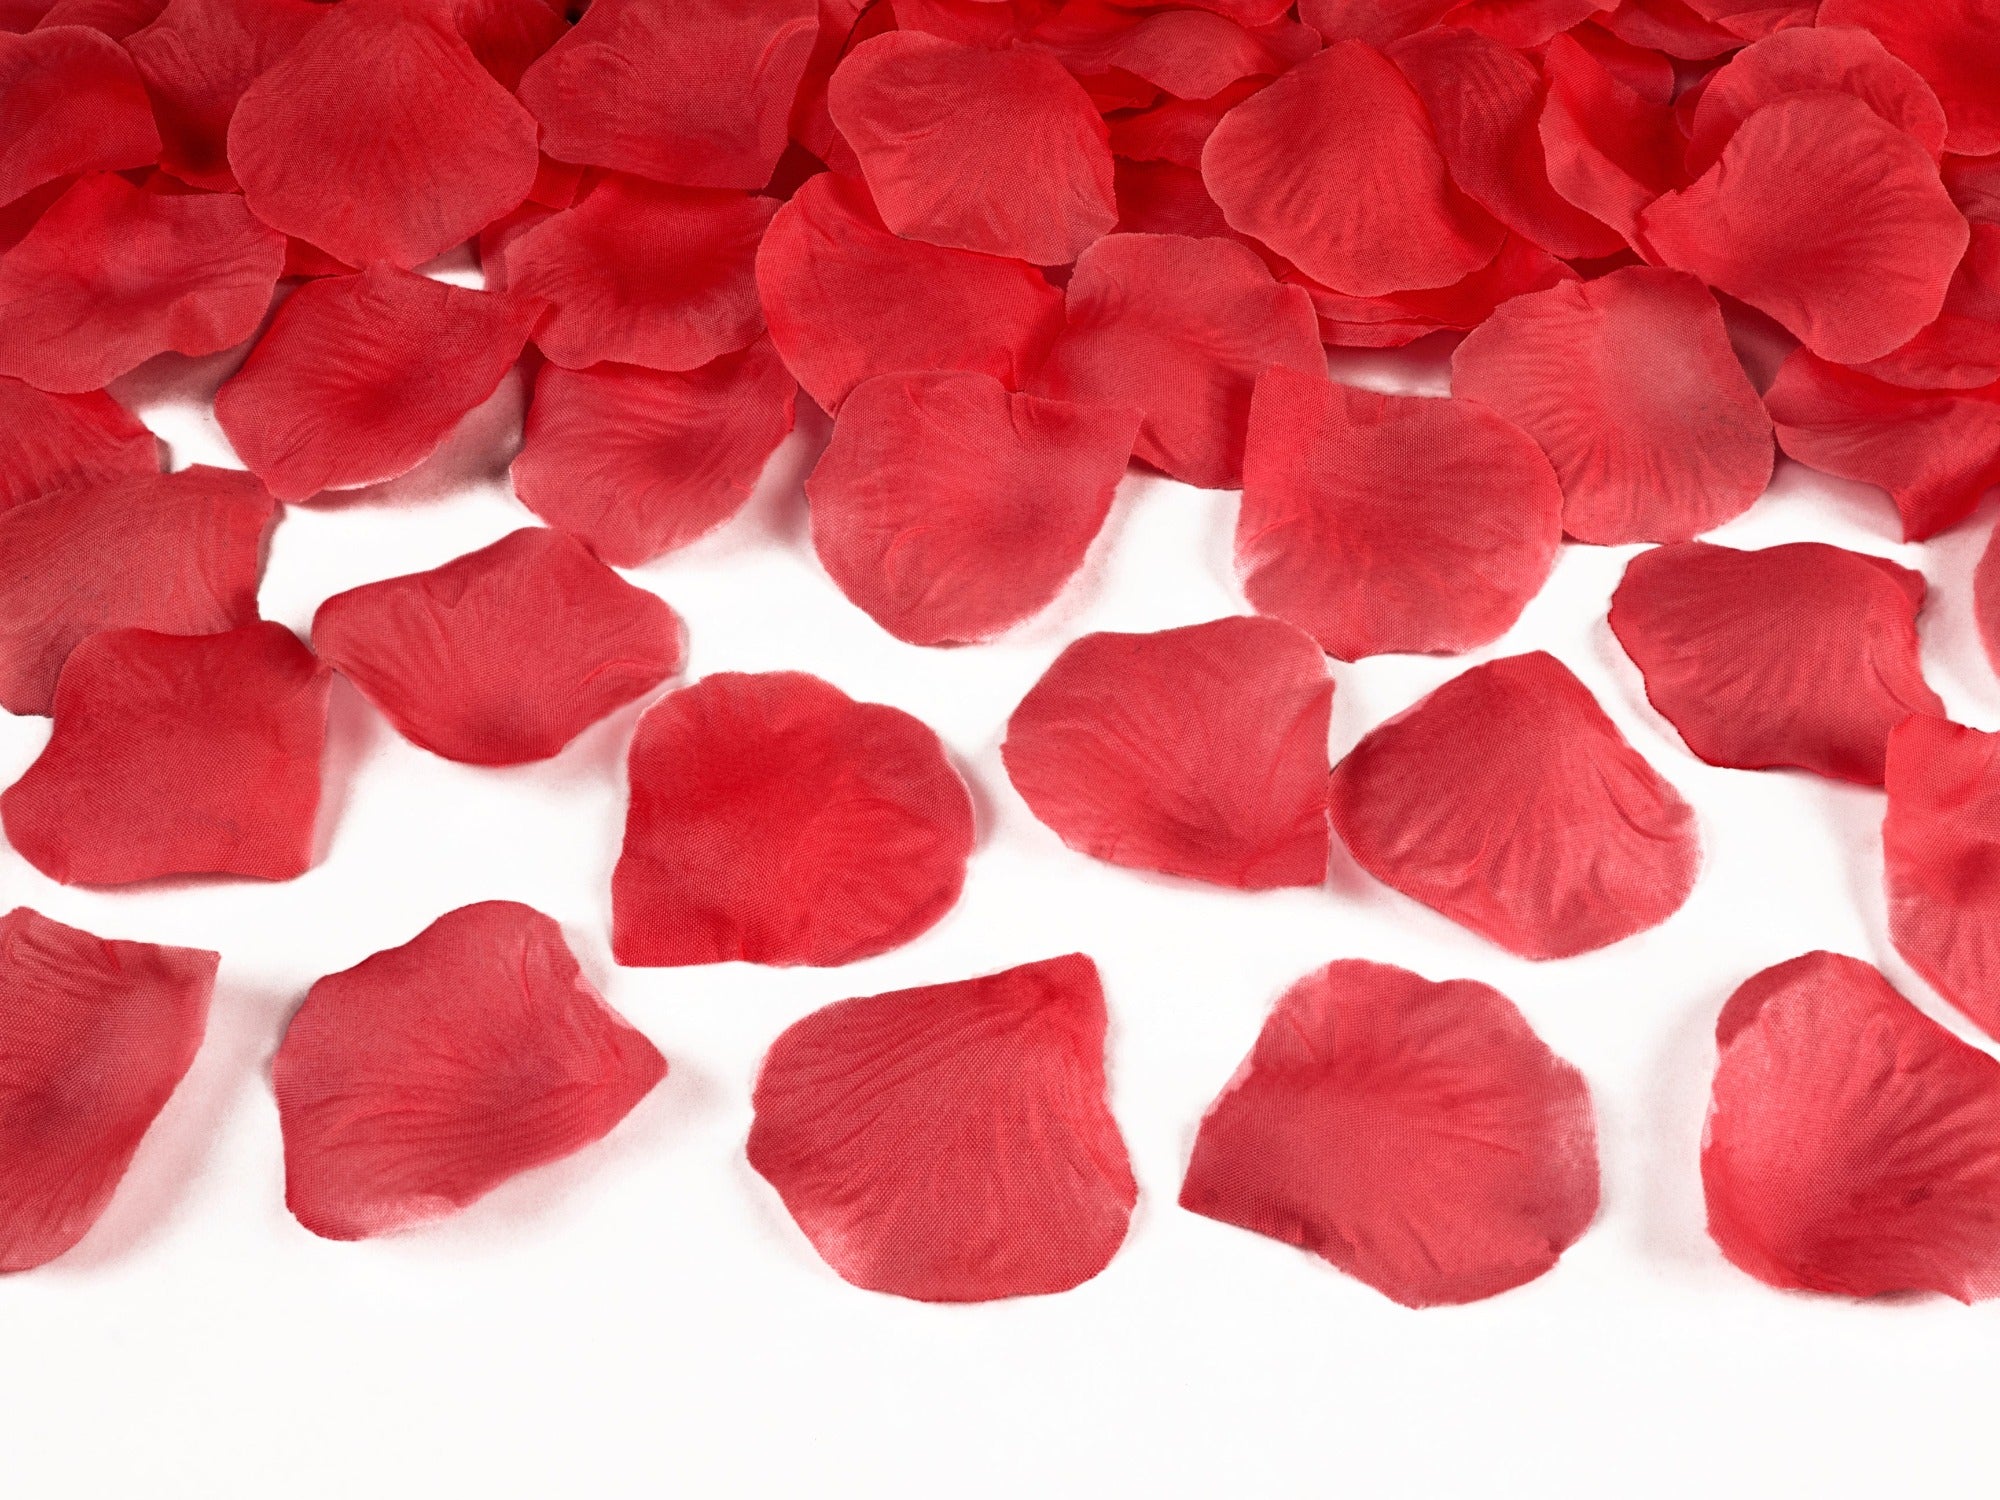 Red Rose Petals Pack of 500